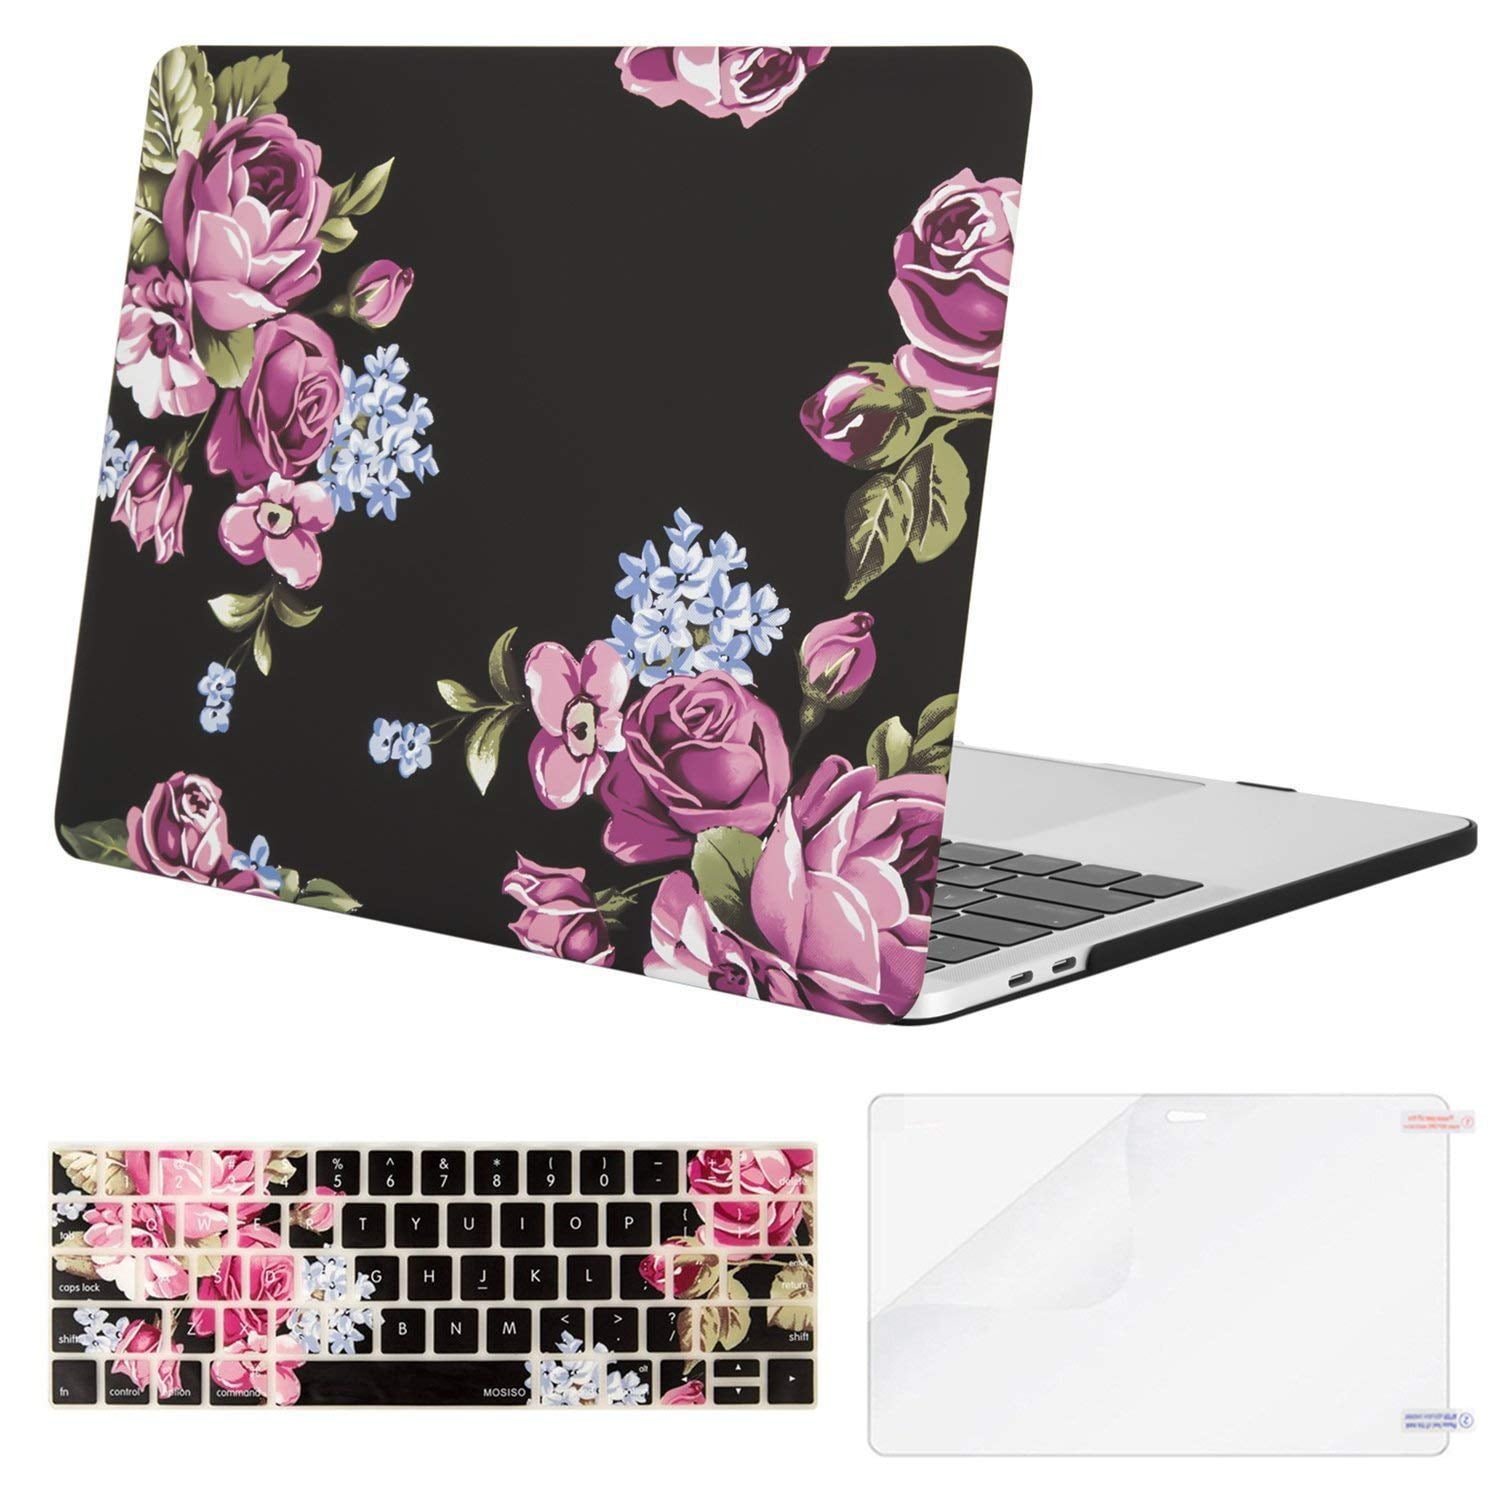 Floral Pattern Matte Hard Case 2017 & 2016 Release 13 Diagonally 2 in 1 TOP CASE A1708 Without Touch Bar Cherry Blossom MacBook Pro 13 Without Touch Bar Keyboard Cover for MacBook Pro 13 